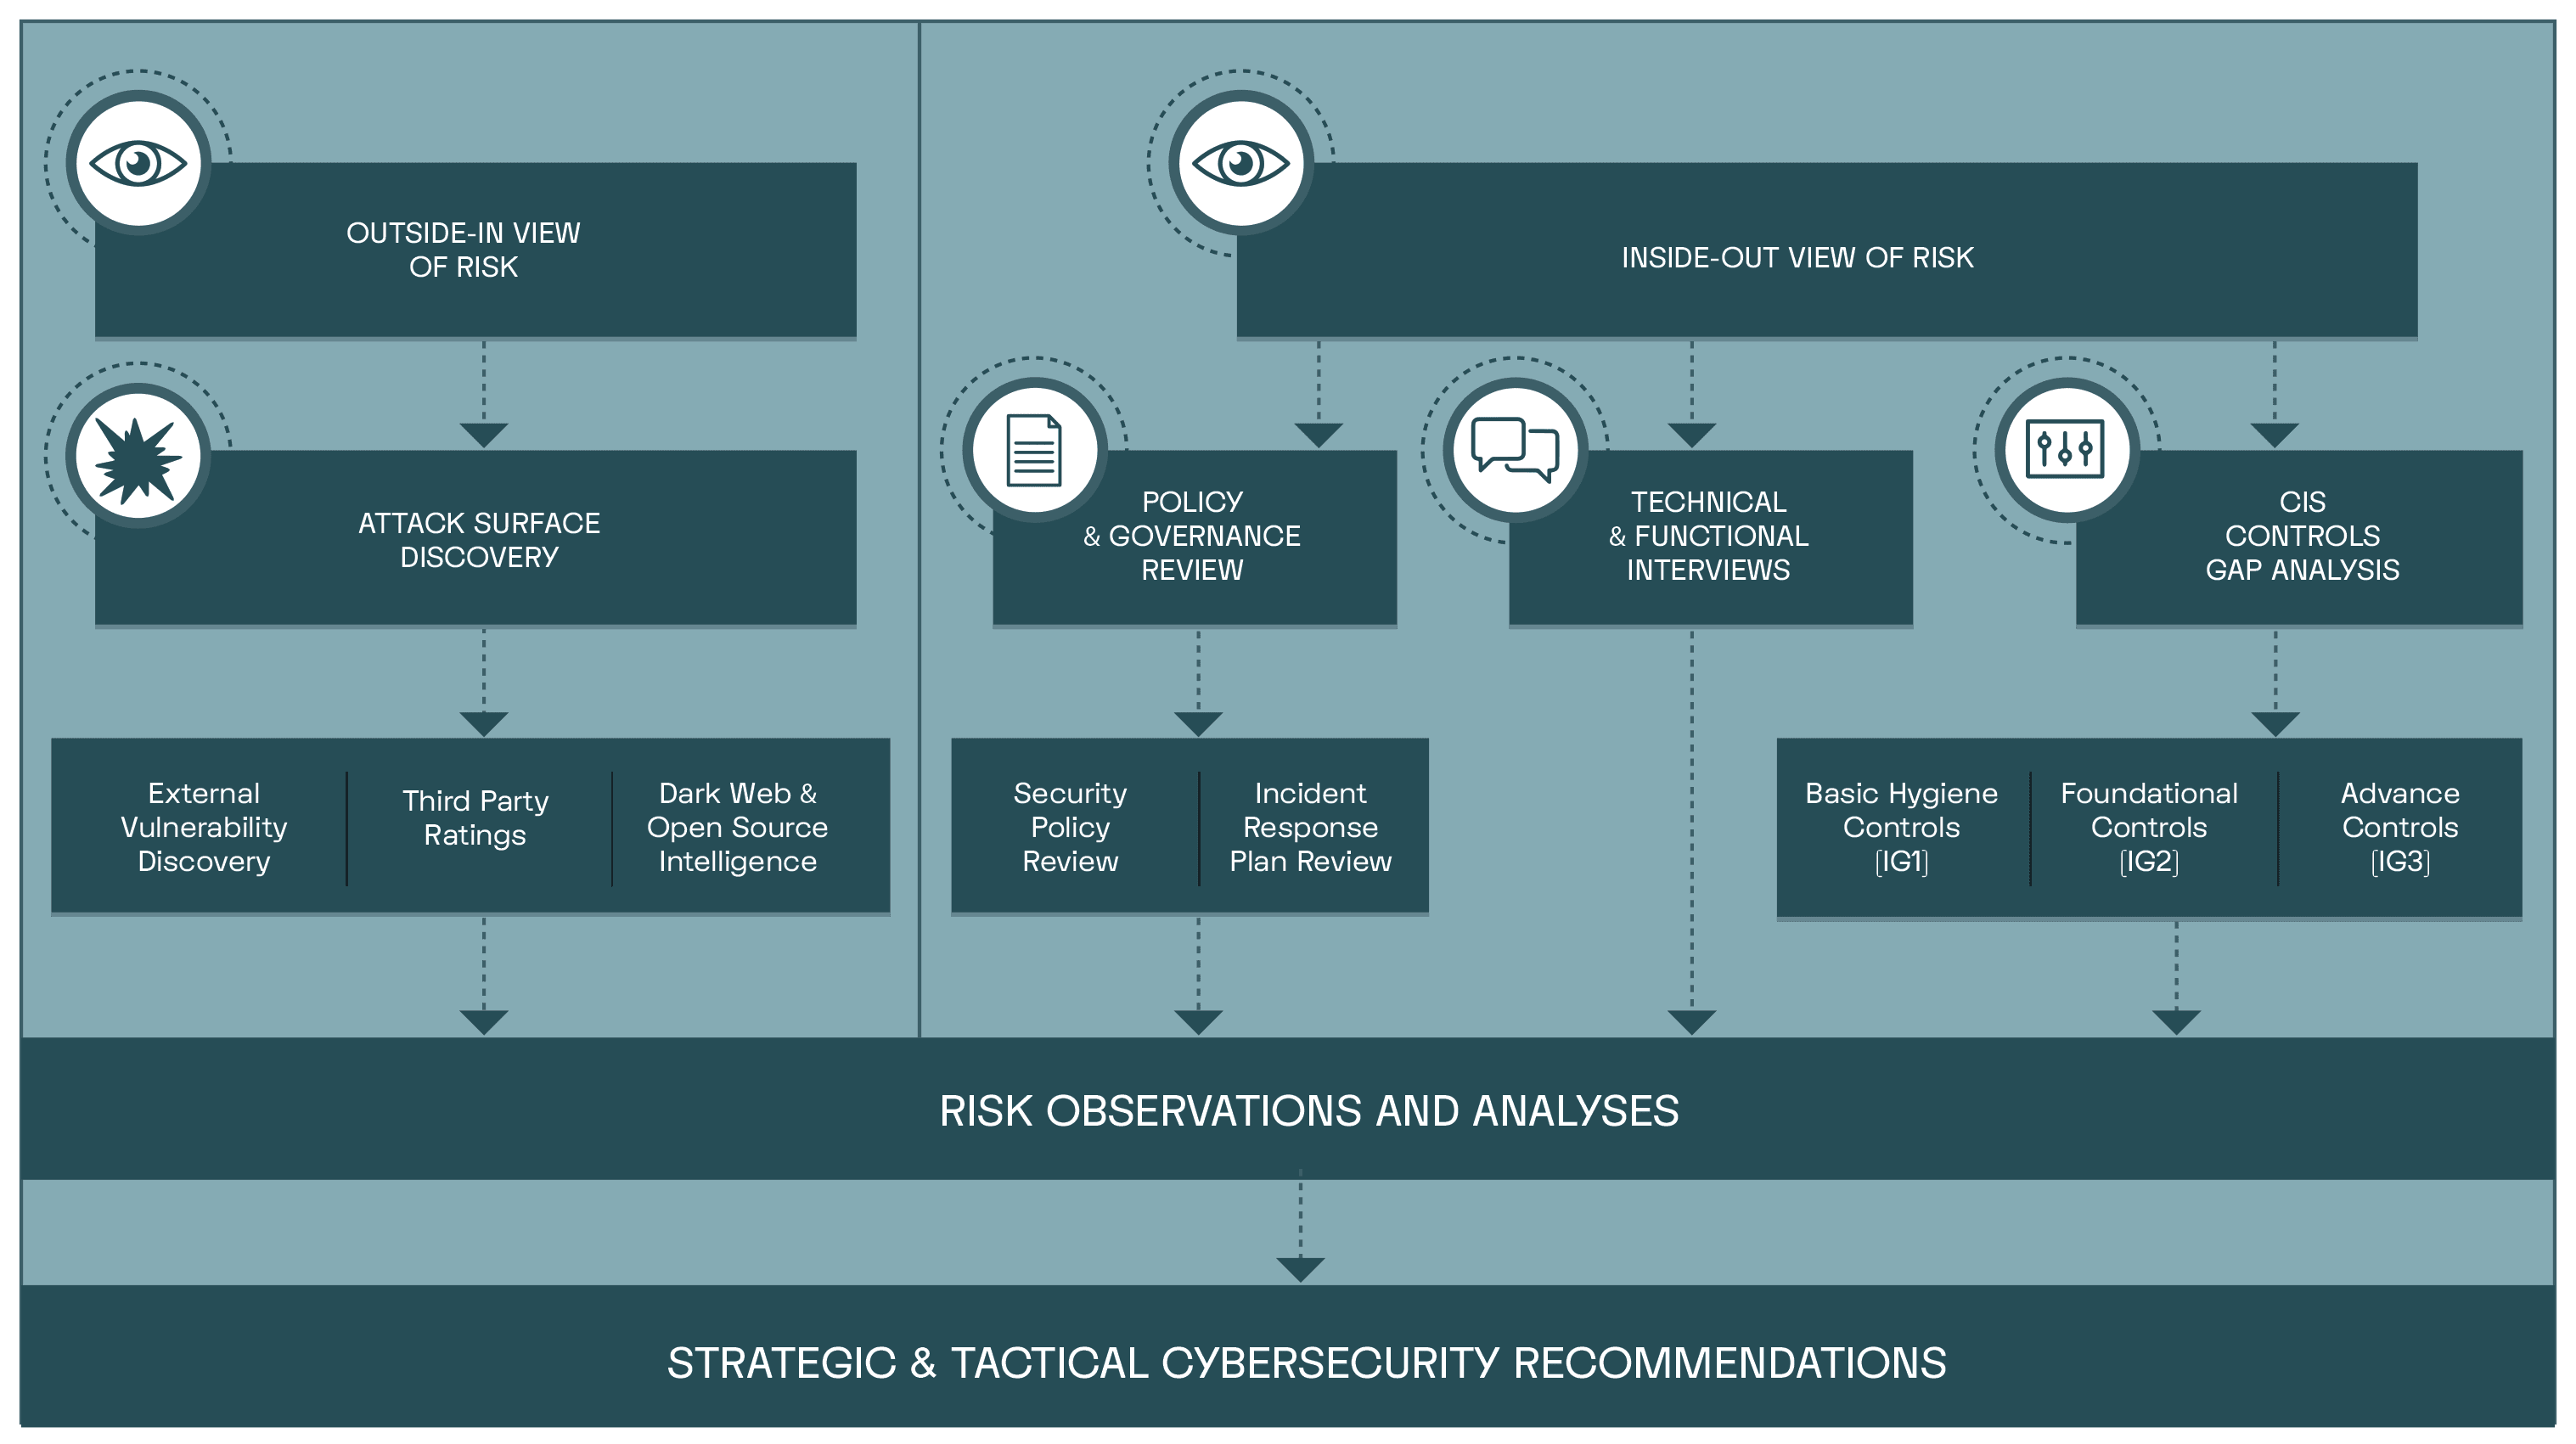 A flow chart depicting Defensible Technology's outside-in and inside-out approach to risk management